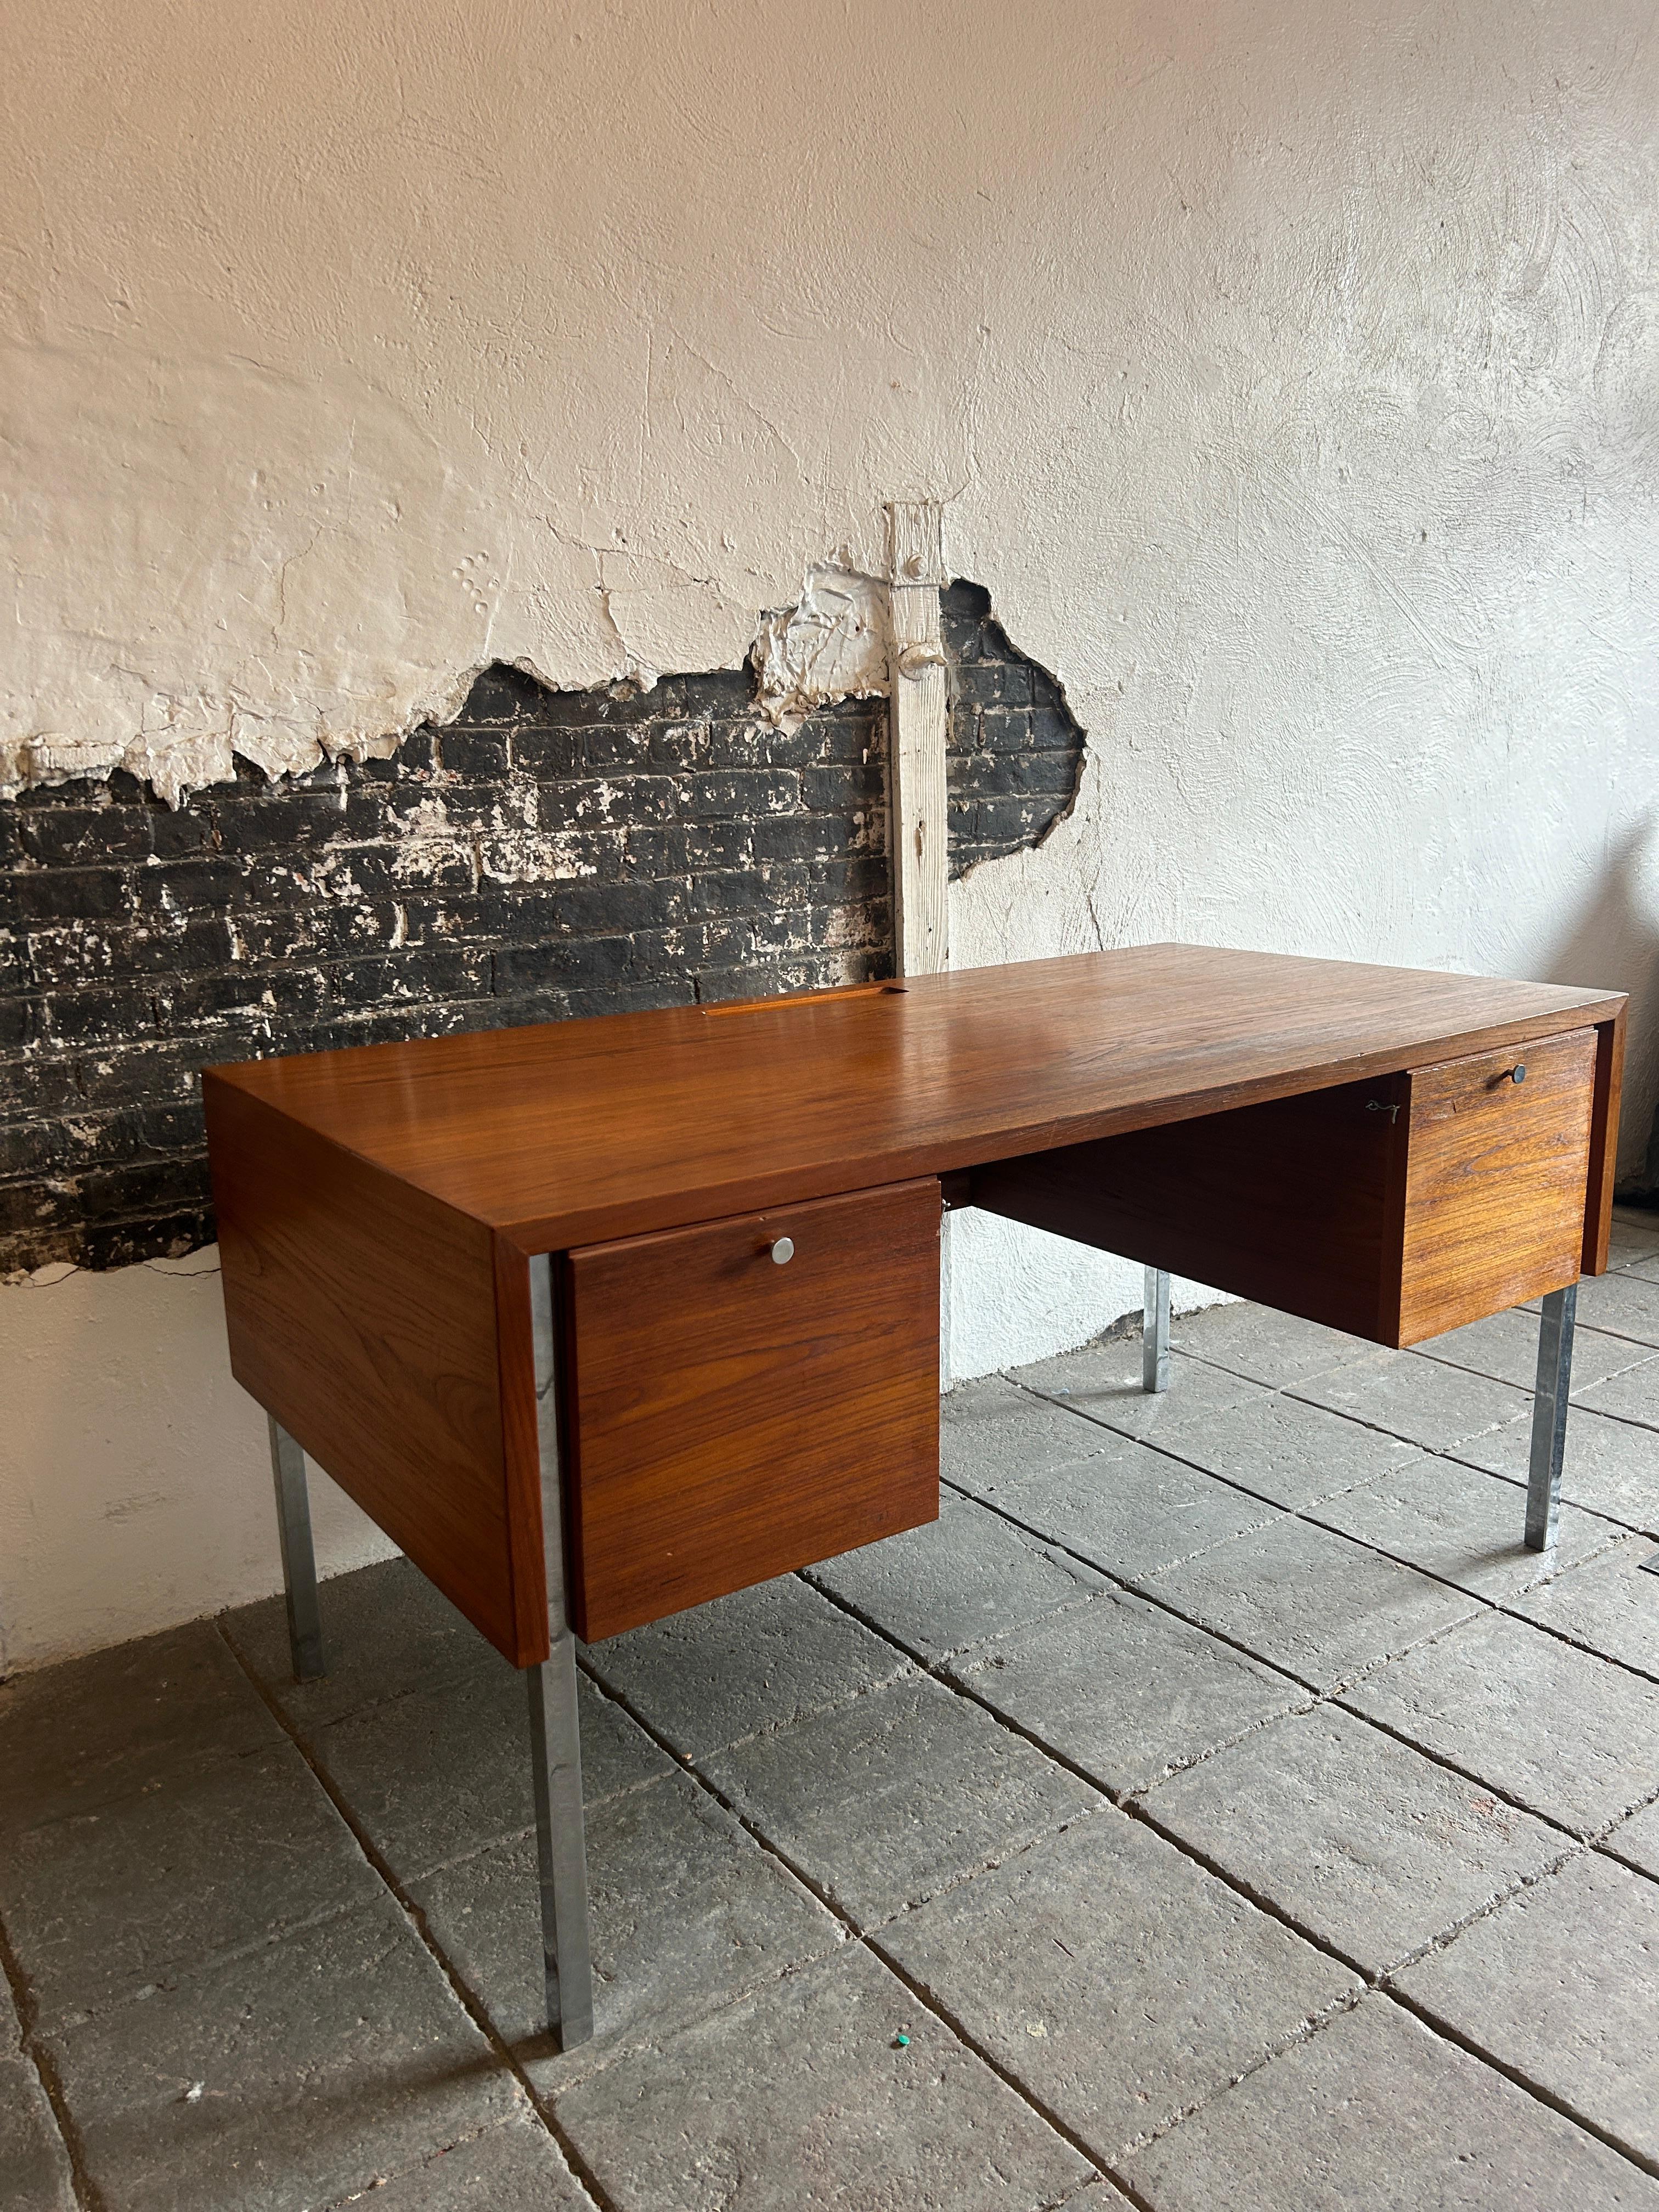 Unique Danish modern Teak and Chrome 6 drawer Writers desk by Sigurd Hansen Møbelfabrik. Very Minimalist Cube Teak desk with Chrome square tube legs and chrome knobs. This Desk has (2) downward cabinet doors on both the left and right side that each